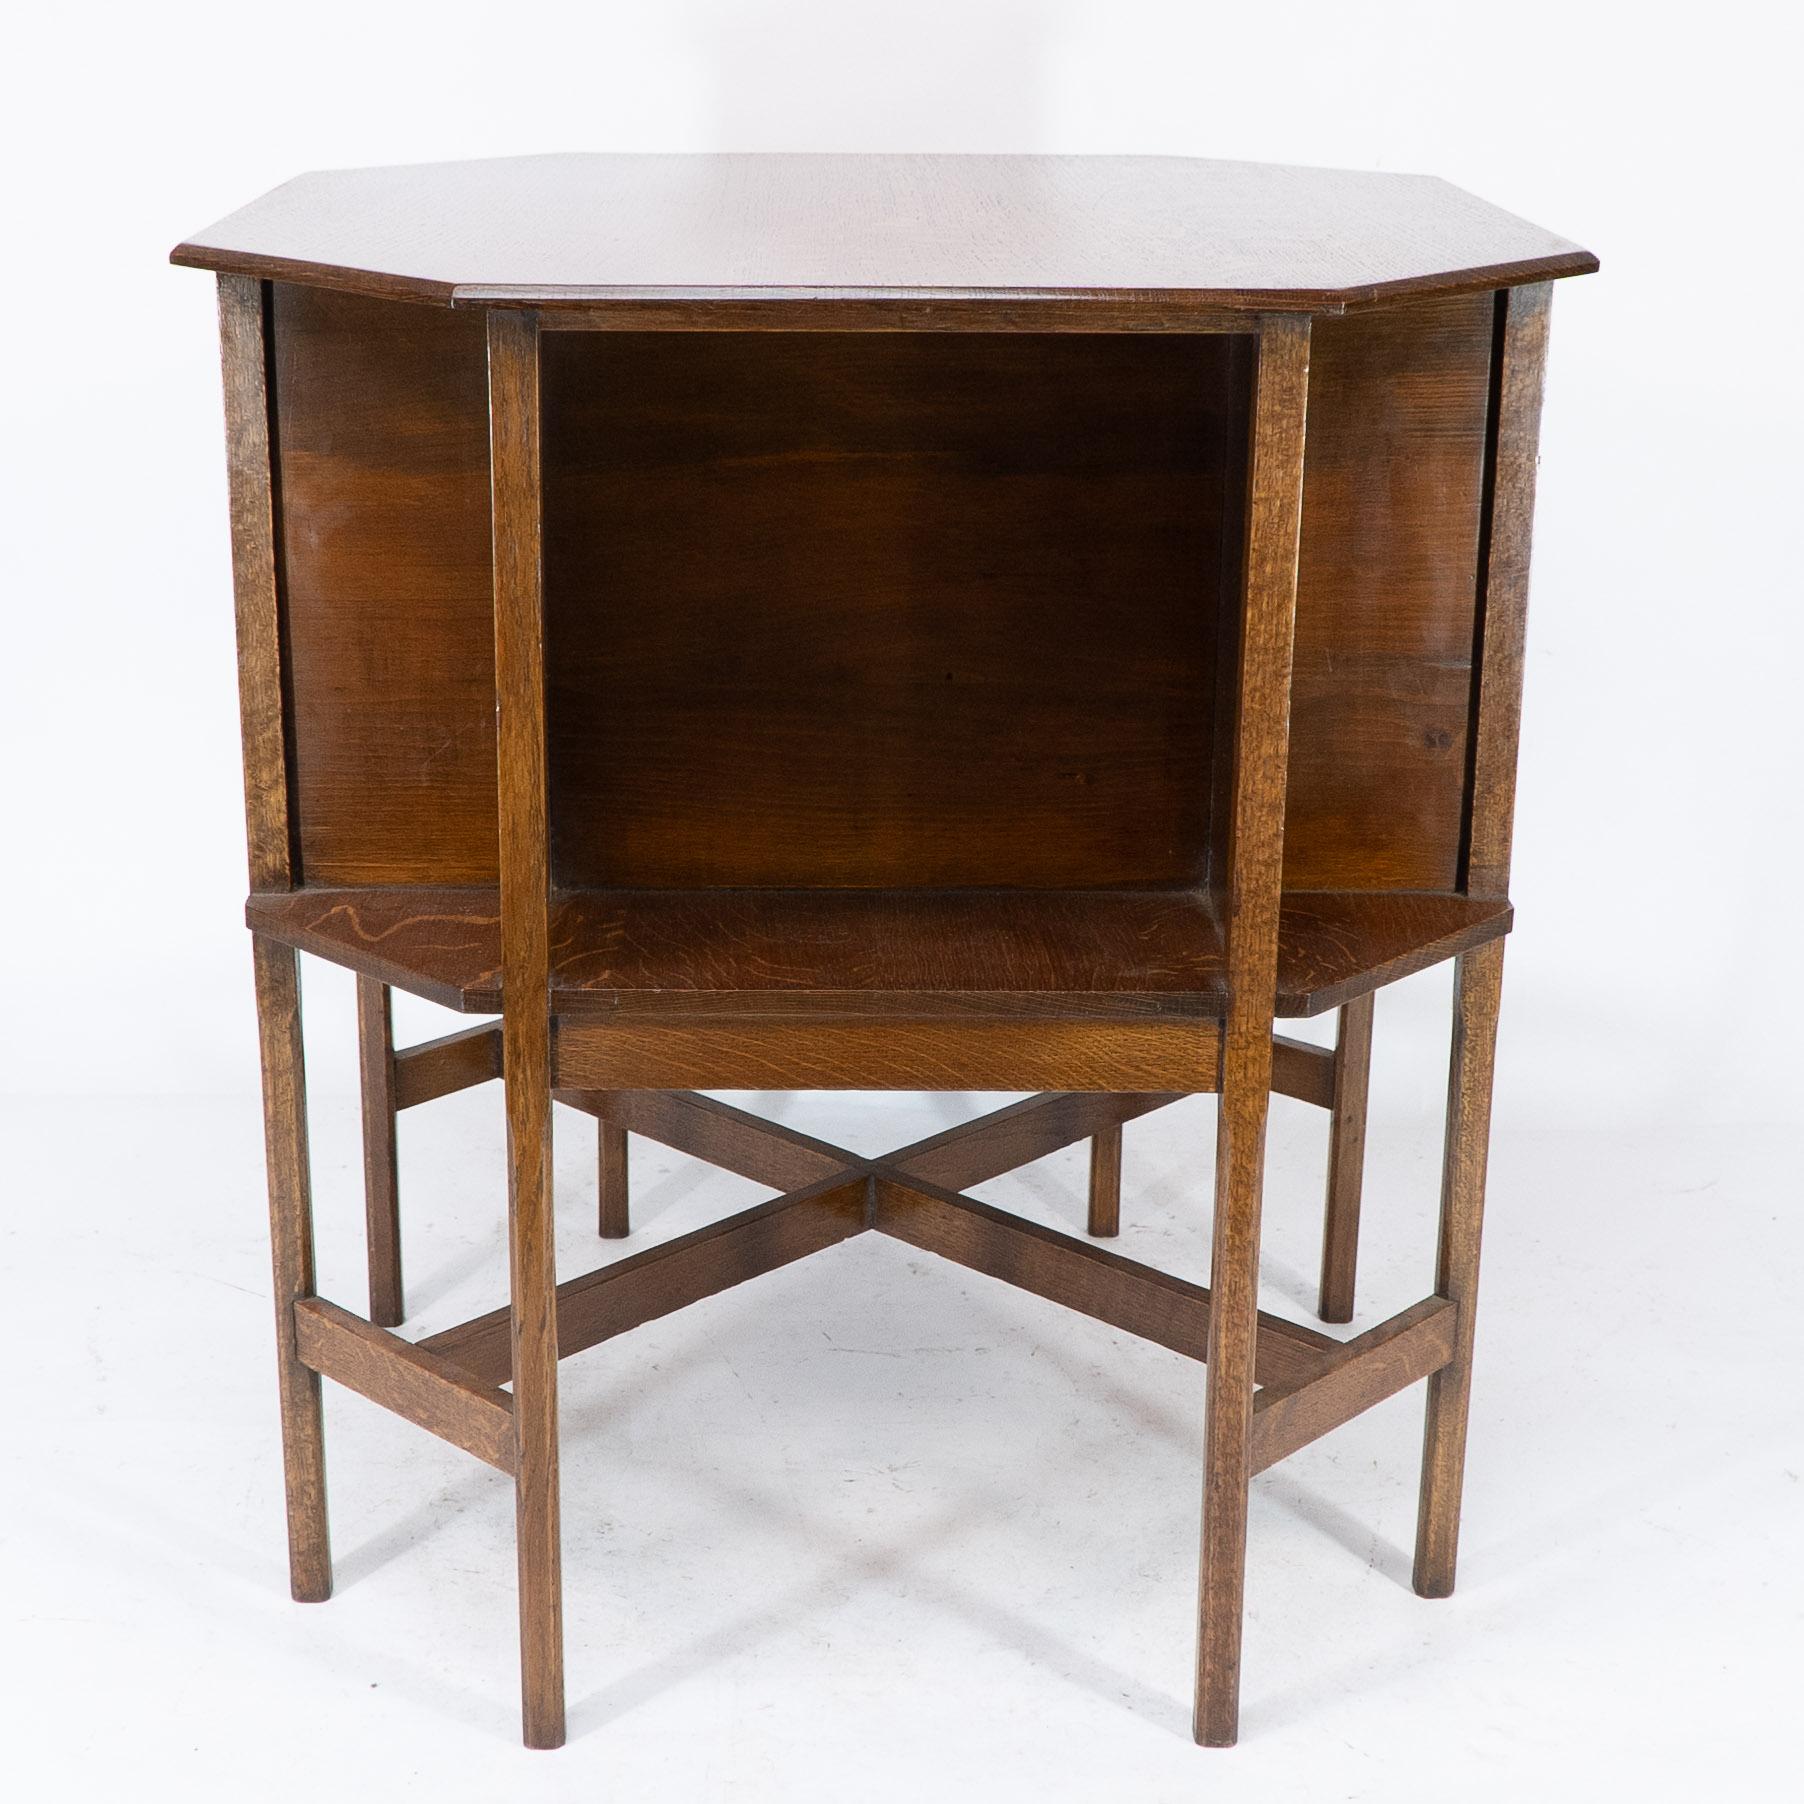 Ambrose Heals Attri, An Arts & Crafts Oak Octagonal Book Table with Eight Legs In Good Condition For Sale In London, GB